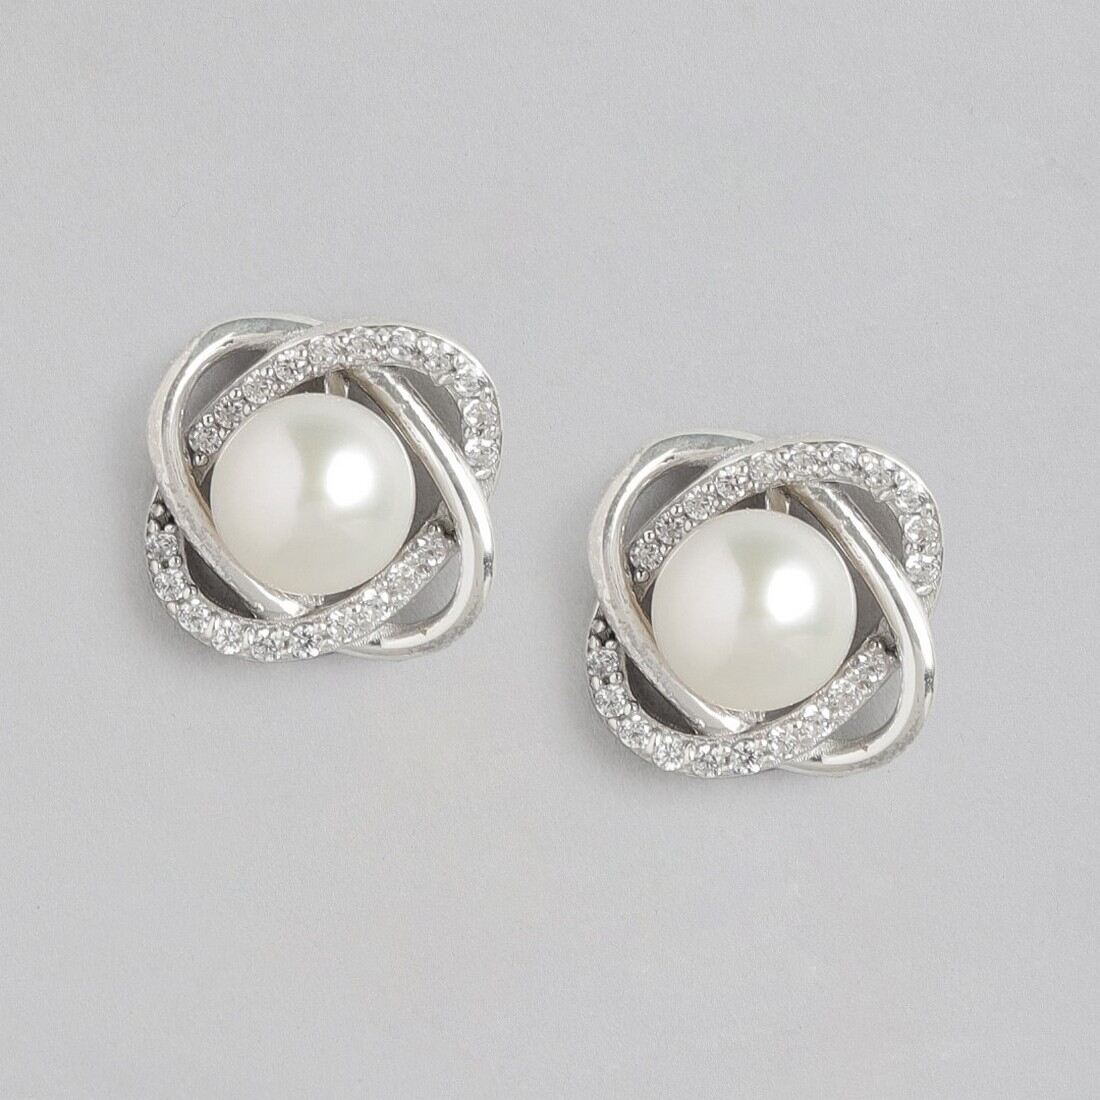 Timeless Elegance 925 Sterling Silver Stud Earrings with Cubic Zirconia & Pearl